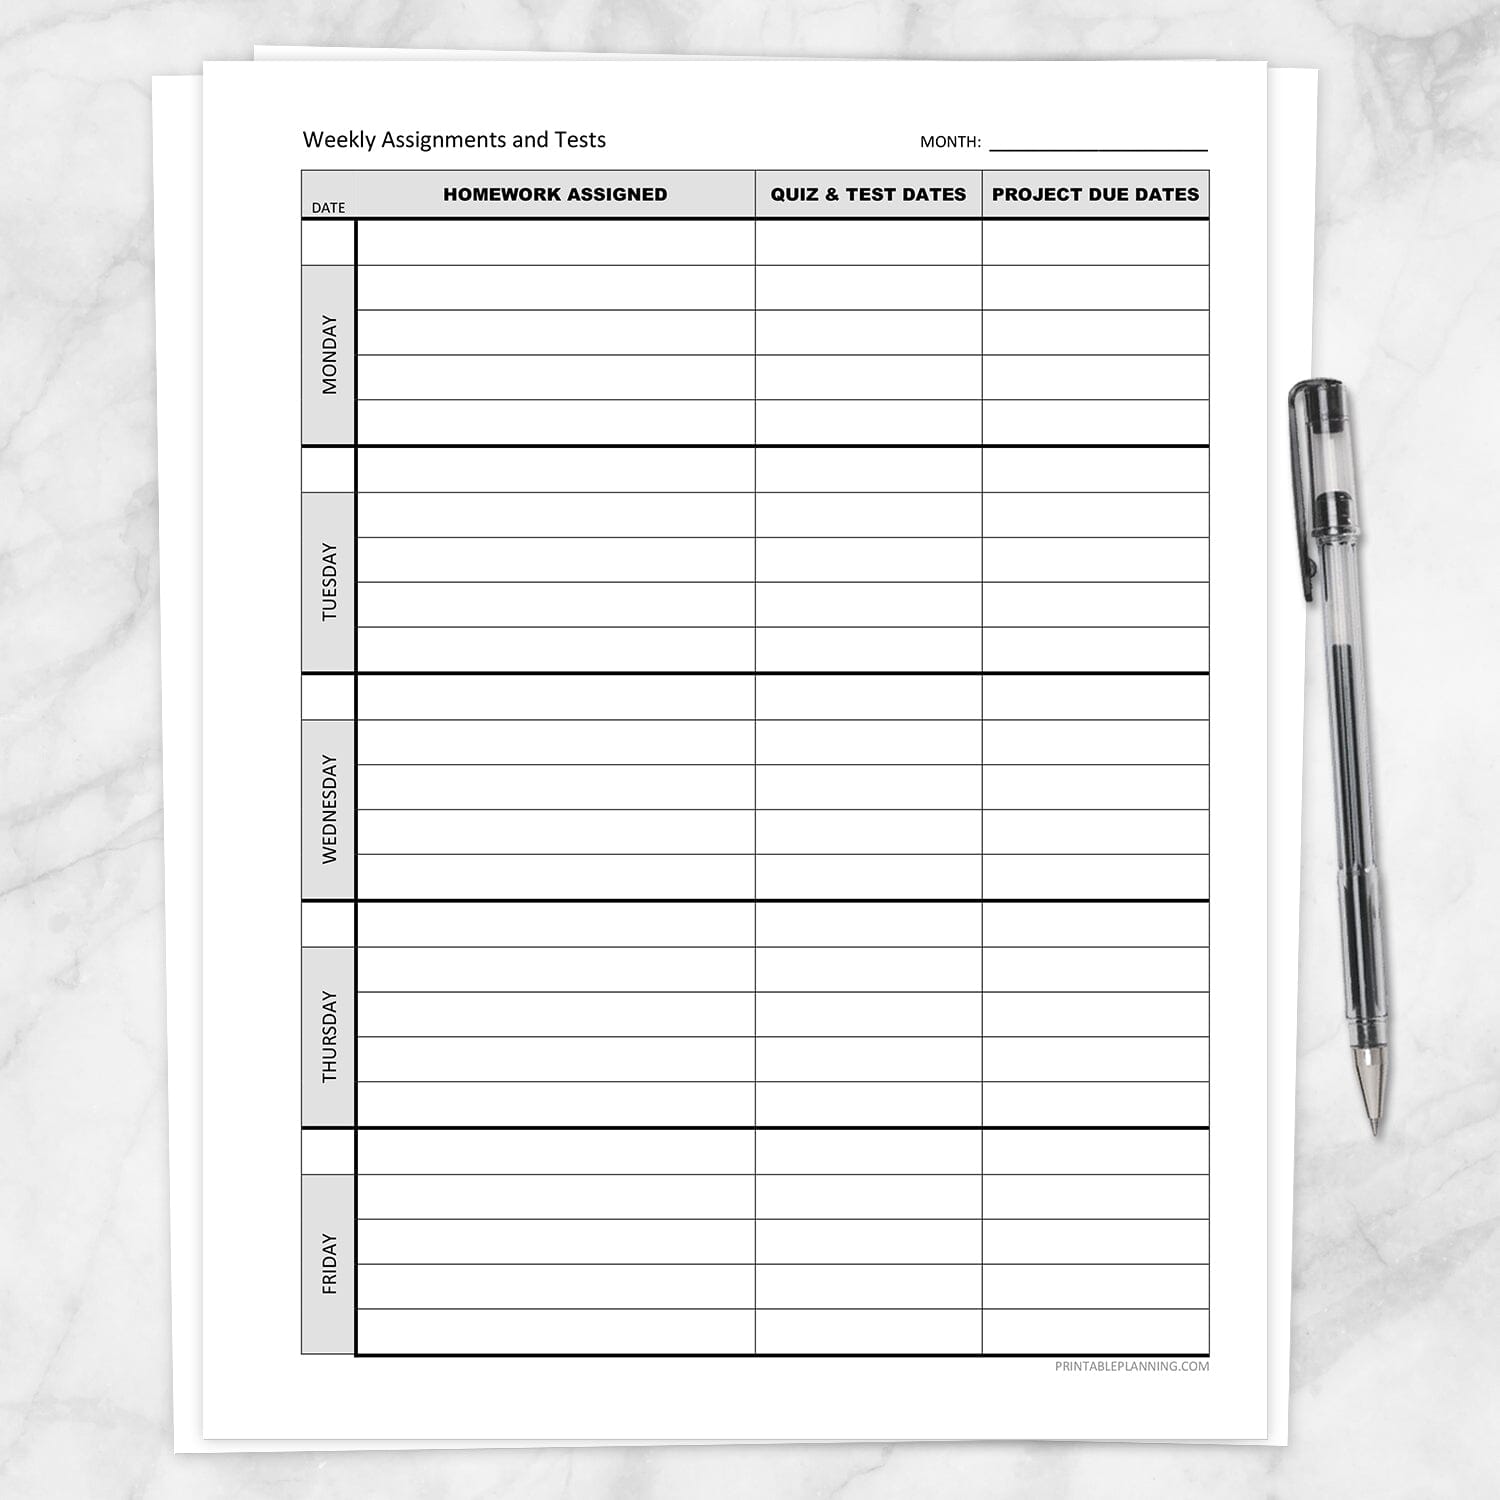 Printable Weekly School Assignments and Tests Sheet (front side) at Printable Planning